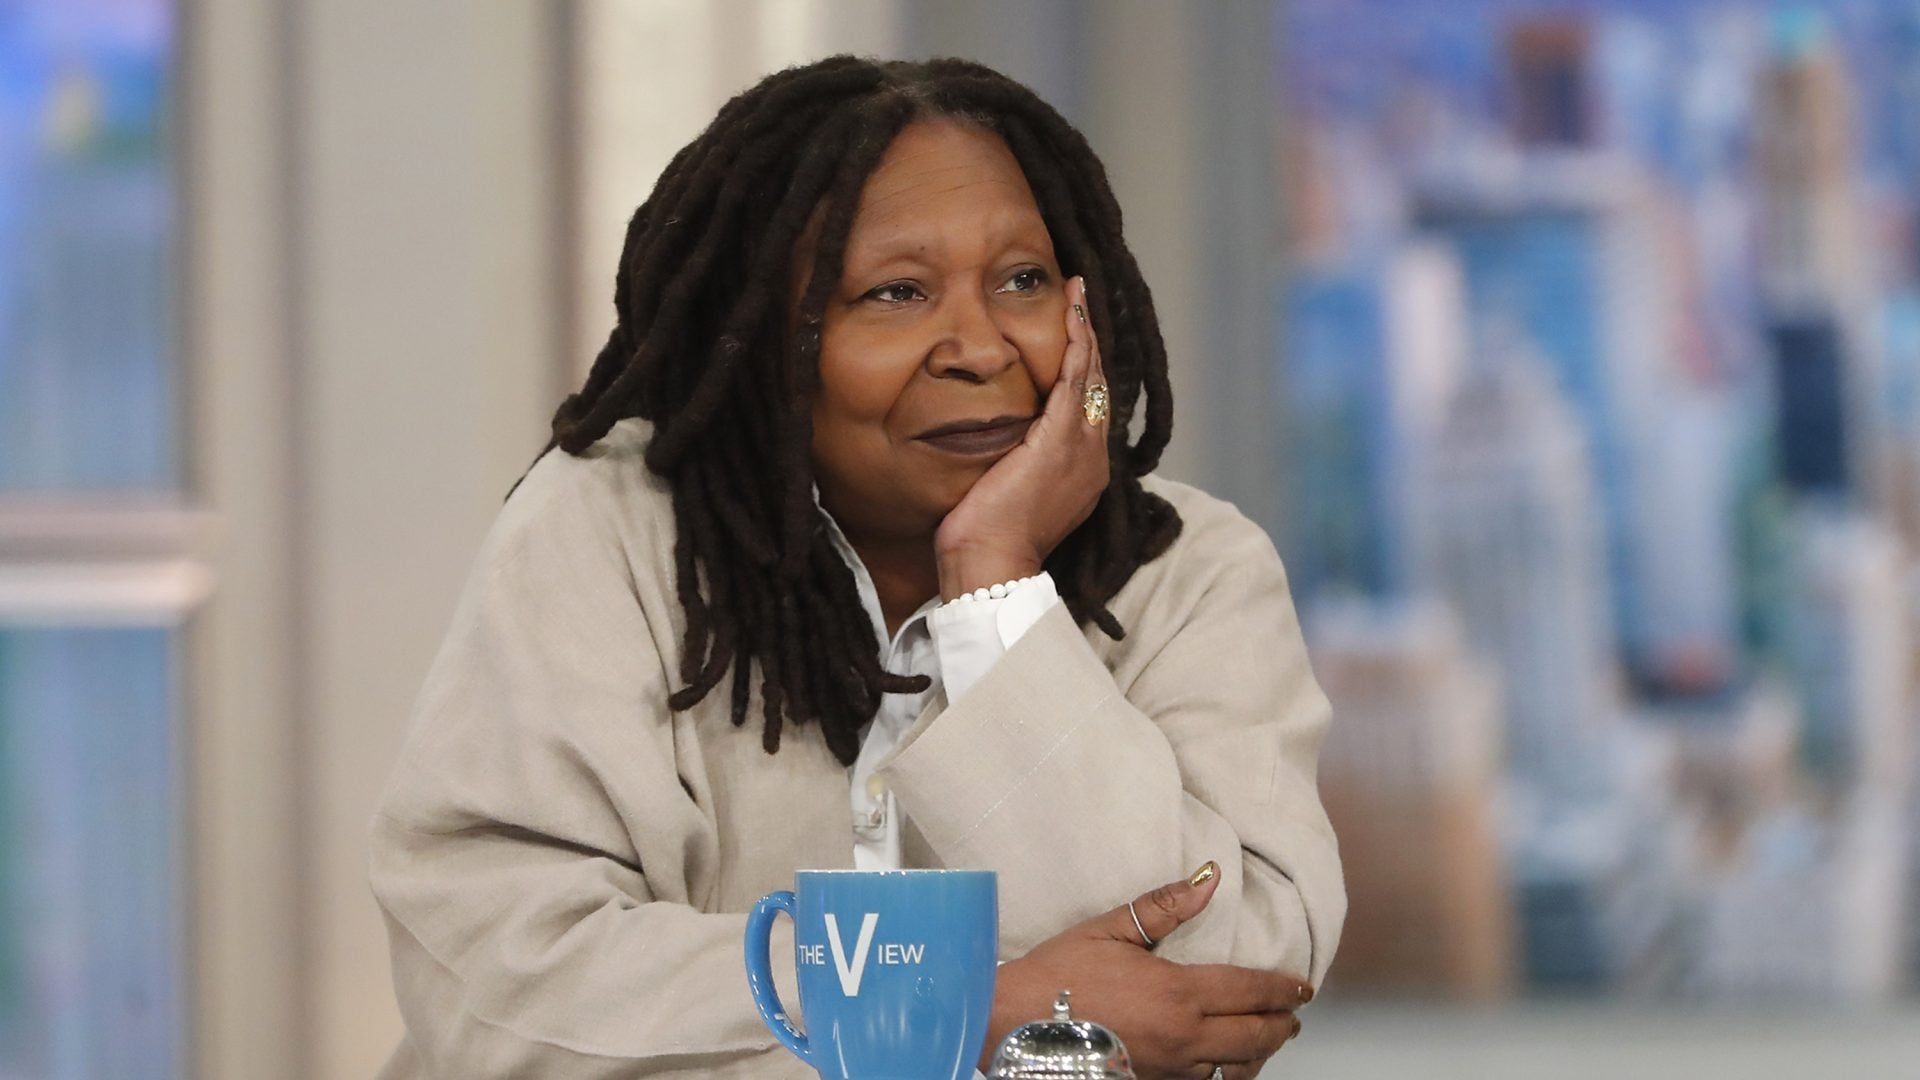 ICYMI: Whoopi Goldberg Absent From Premiere Of 'The View' Due To COVID 